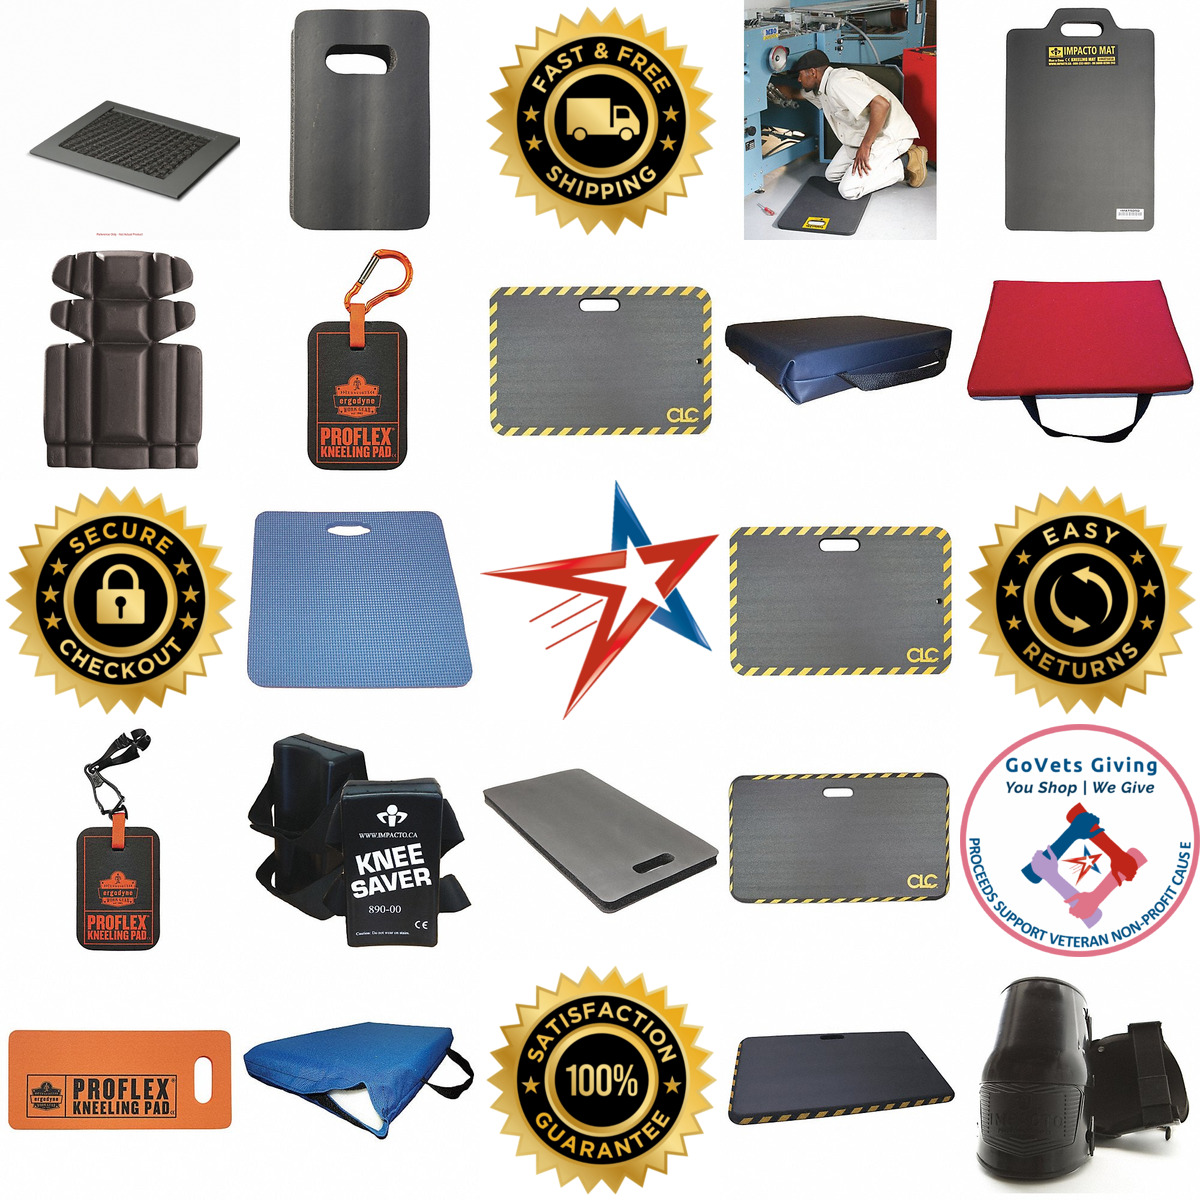 A selection of Kneeling Pads products on GoVets